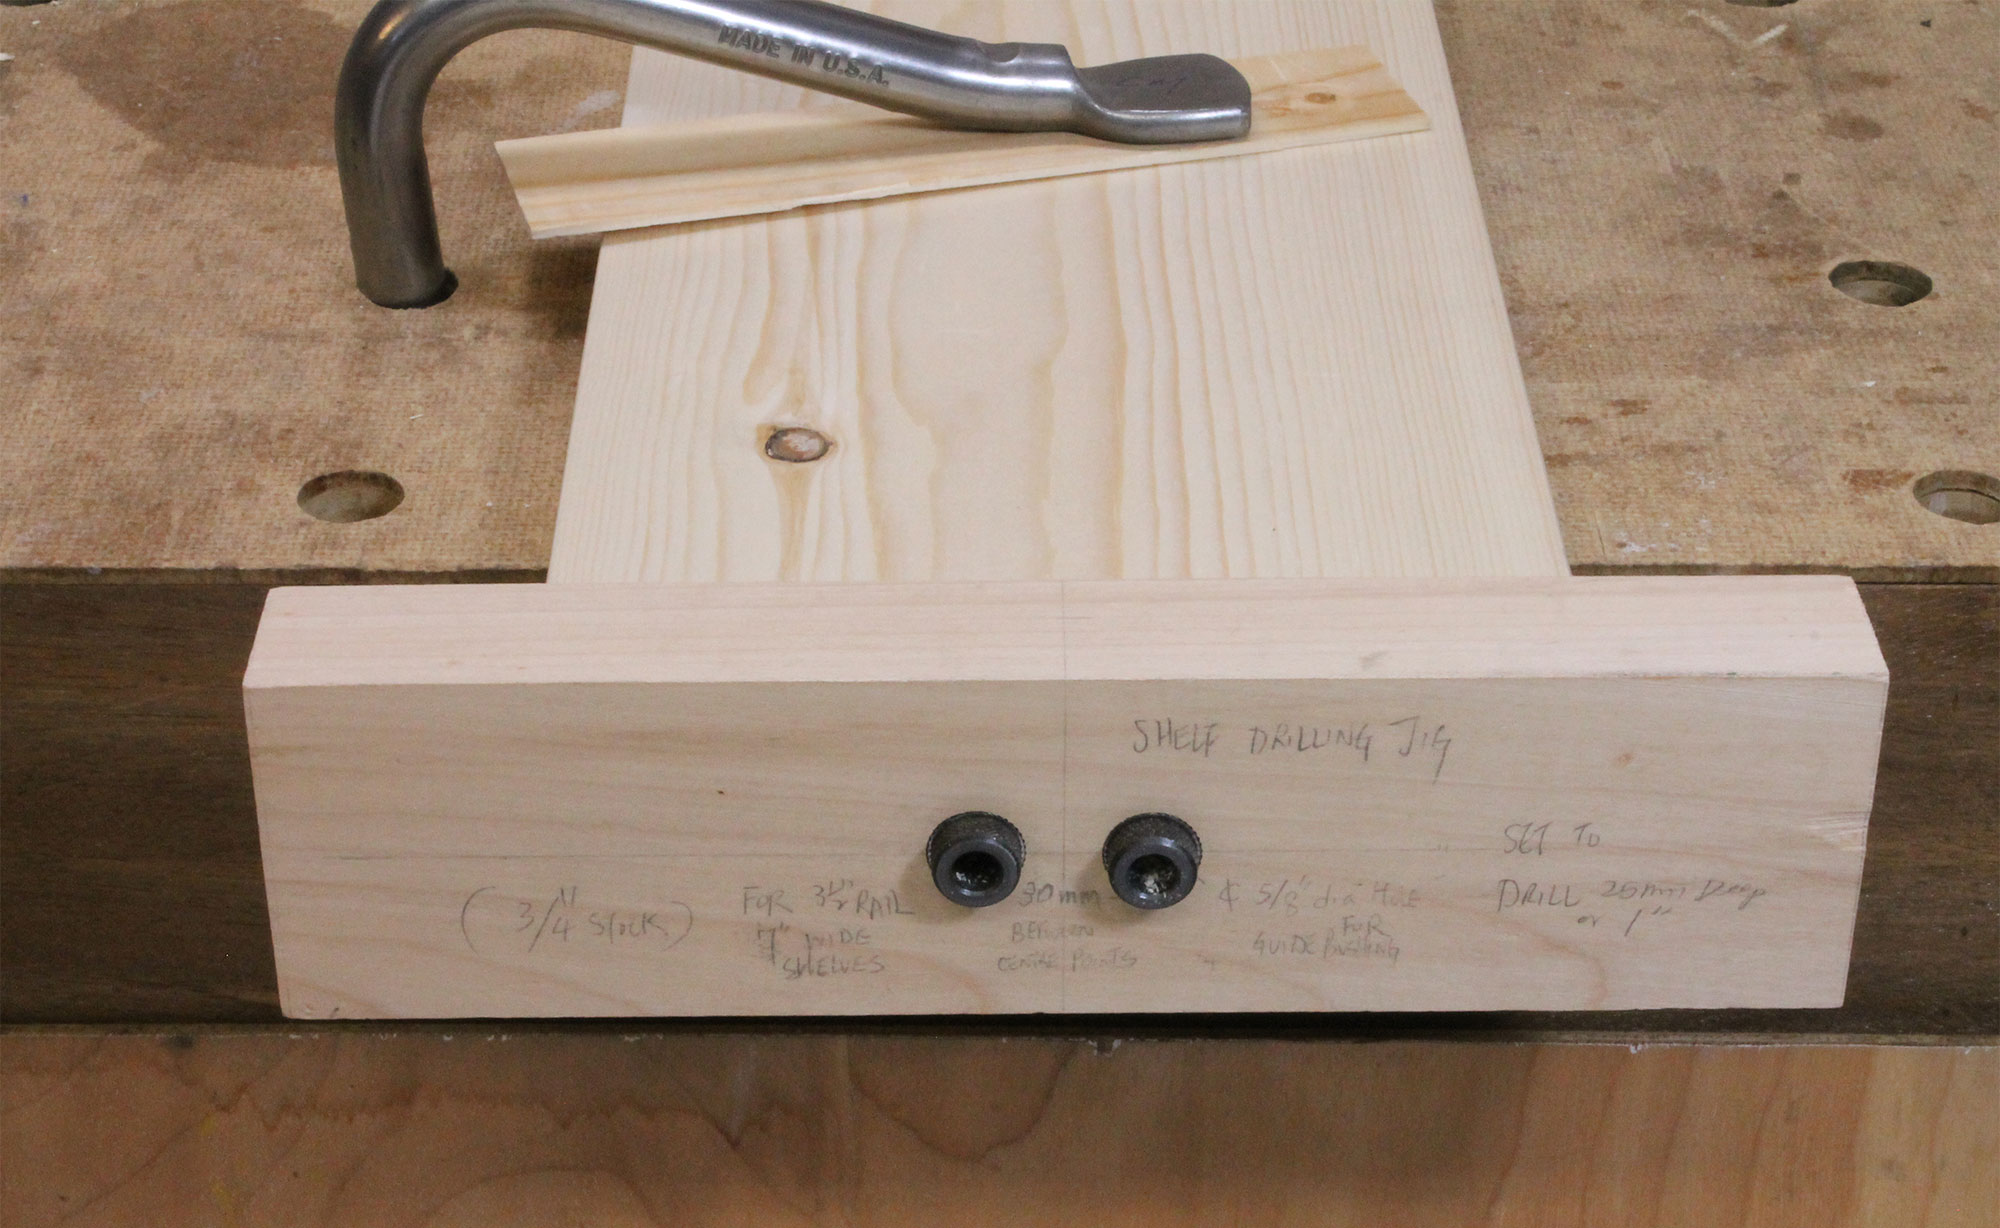 The shelf jig should remain in the same orientation throughout the drilling process.